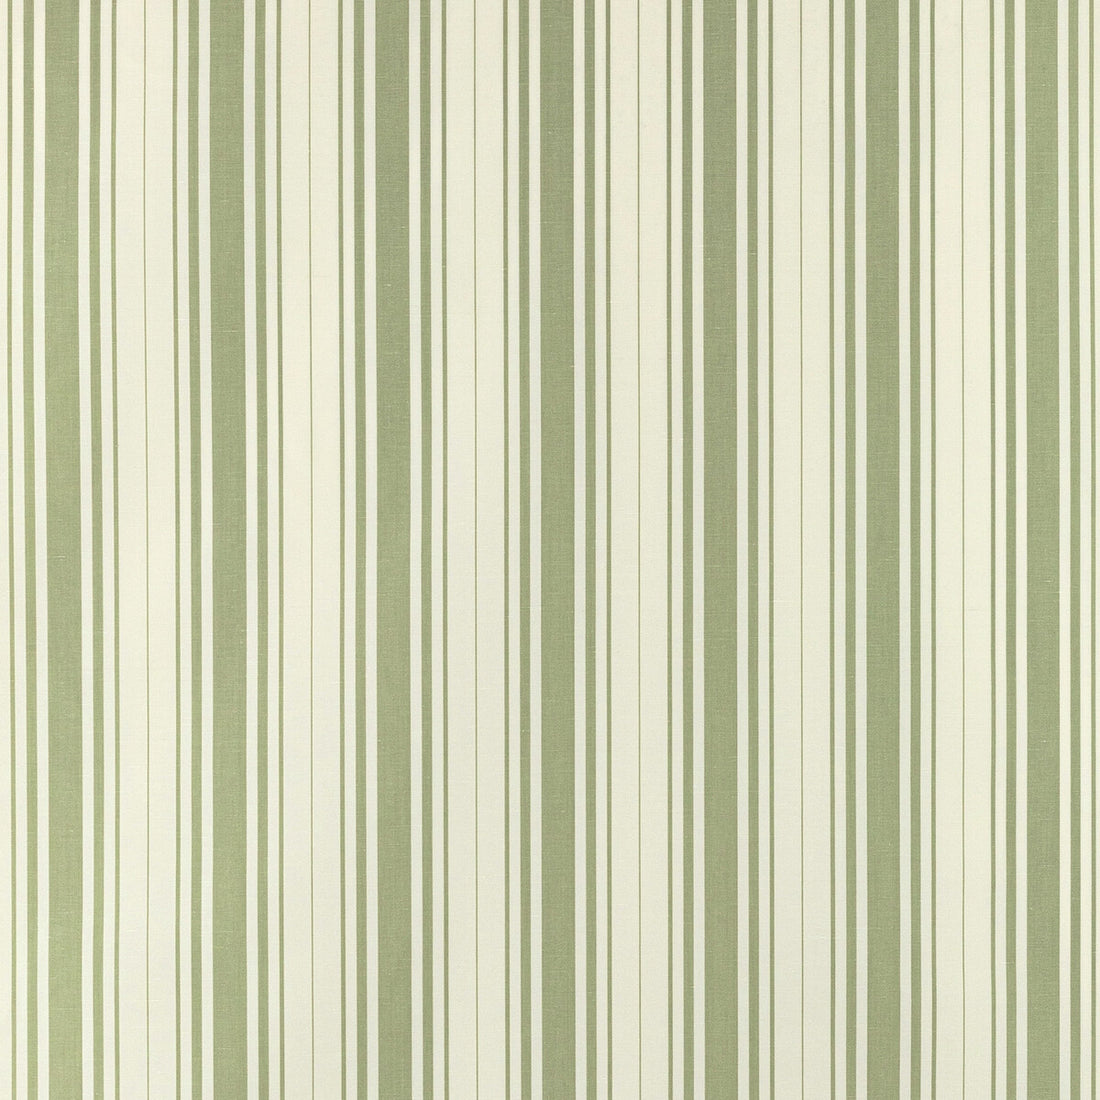 Baldwin Stripe fabric in celery color - pattern 2022100.23.0 - by Lee Jofa in the Sarah Bartholomew collection